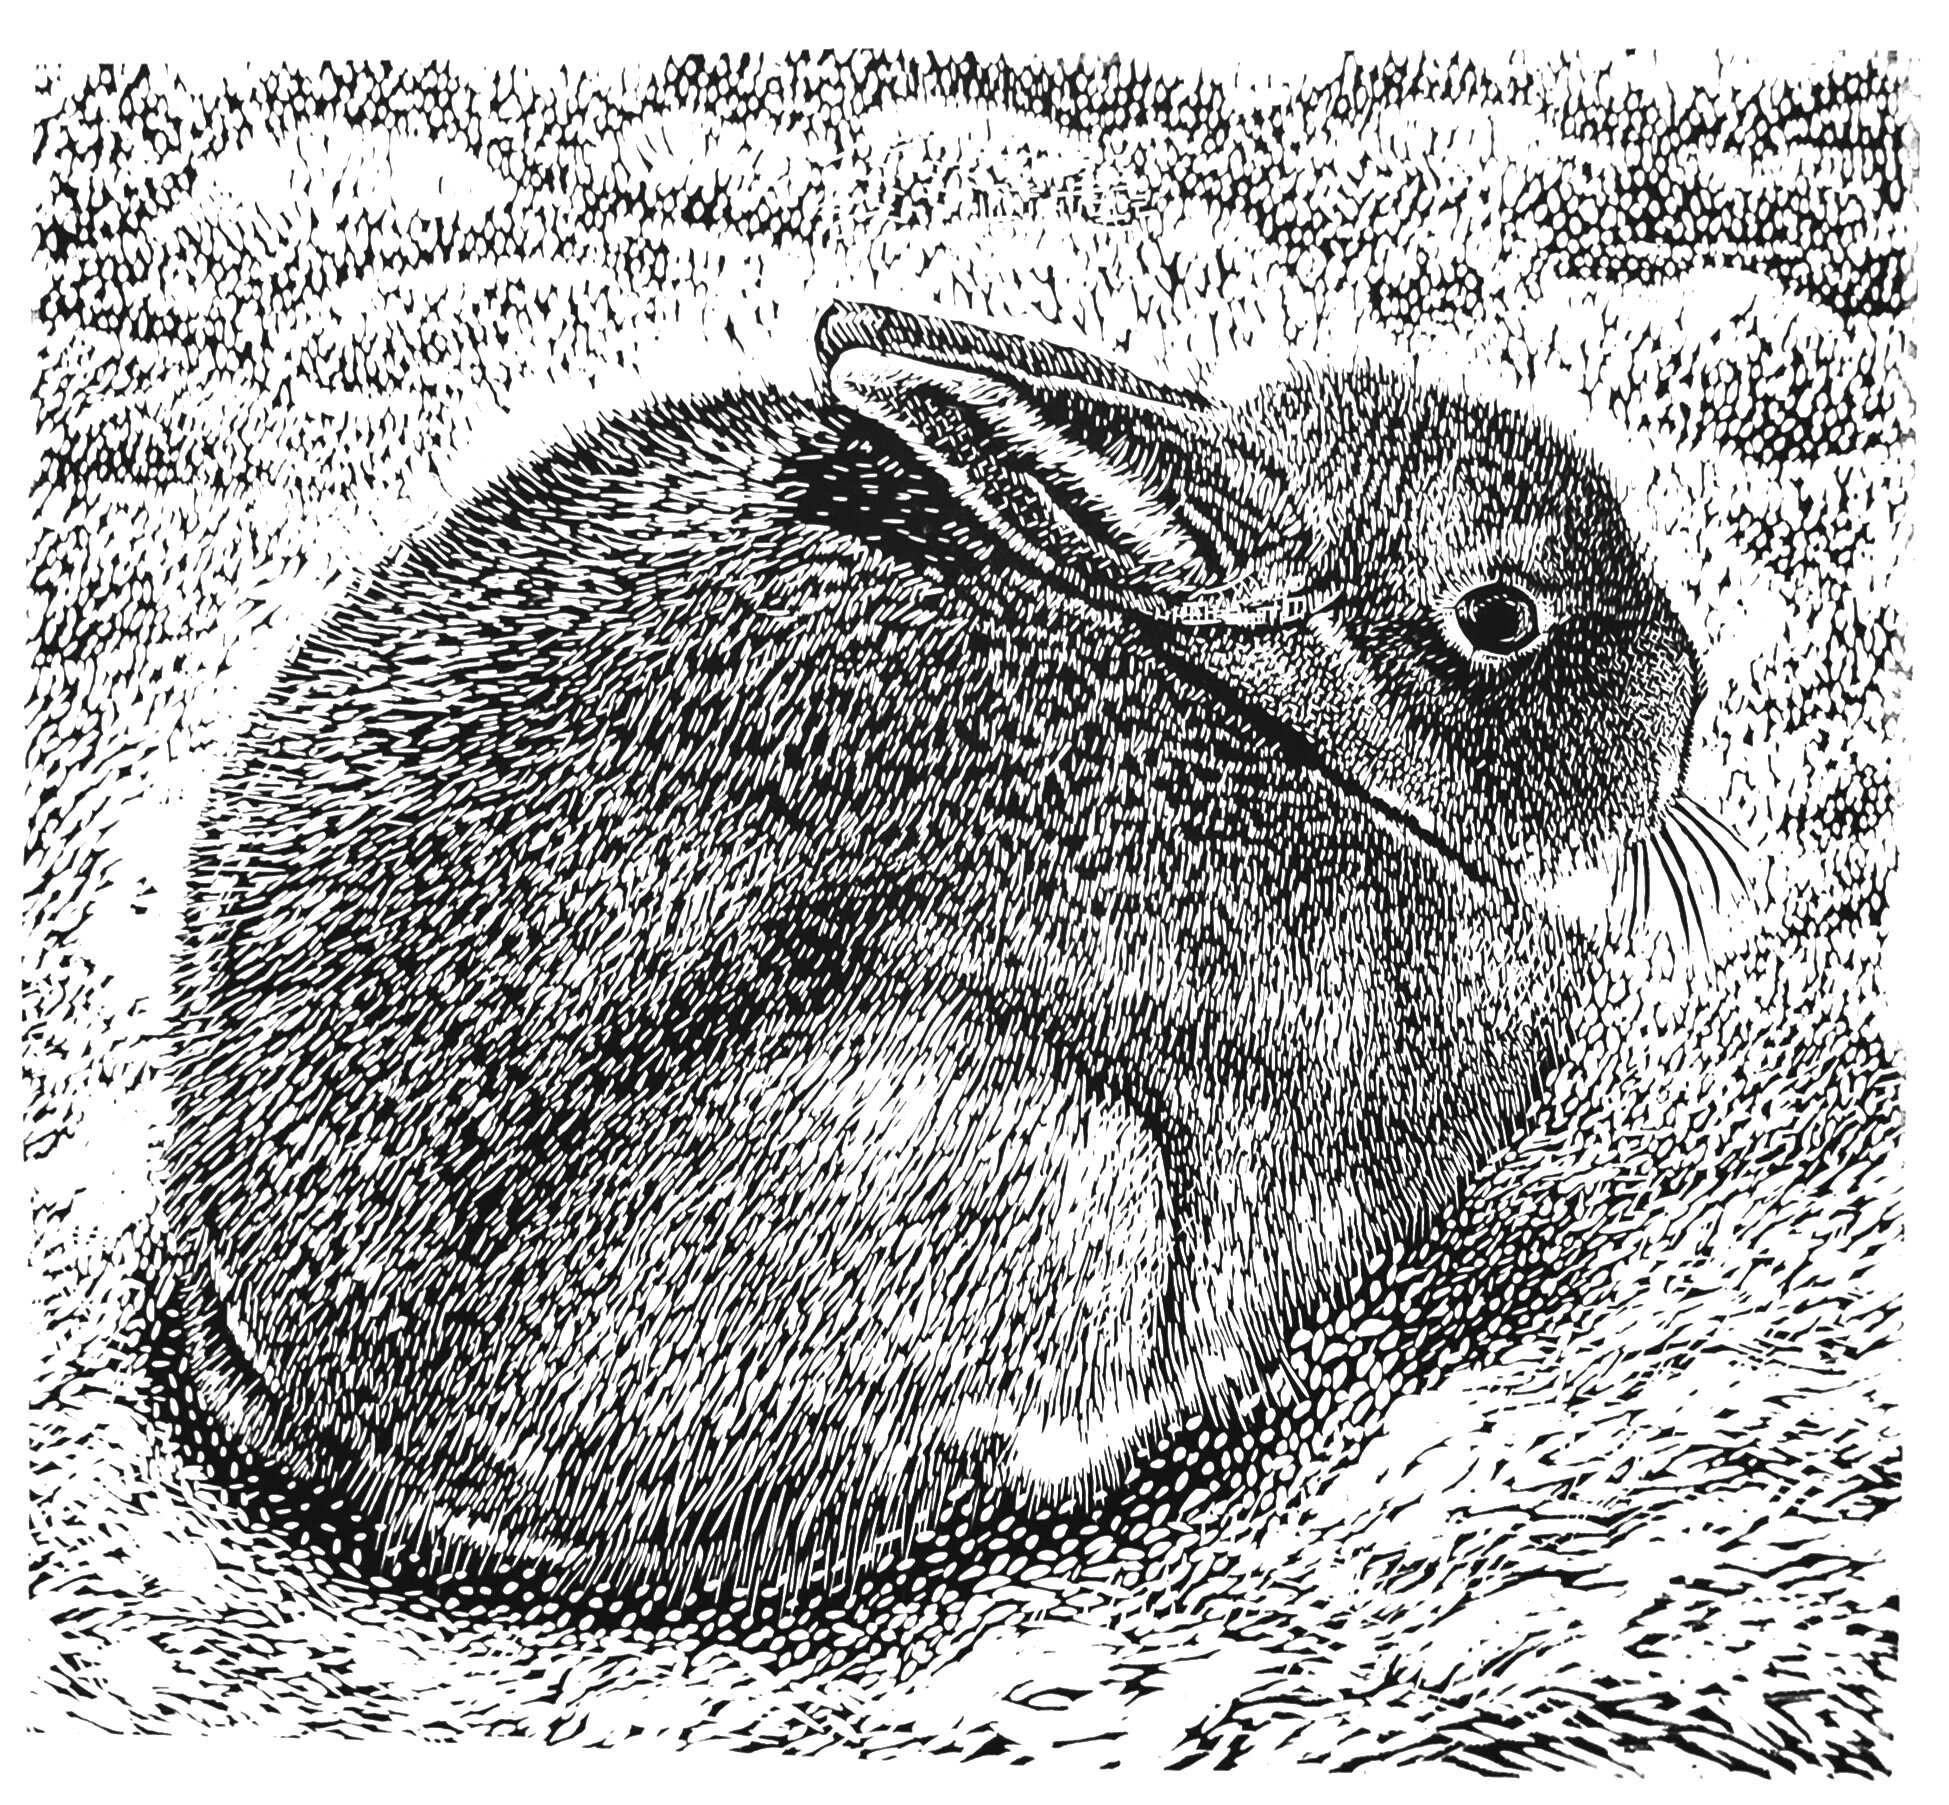 Mountain Hare | 2017 | relief print | available